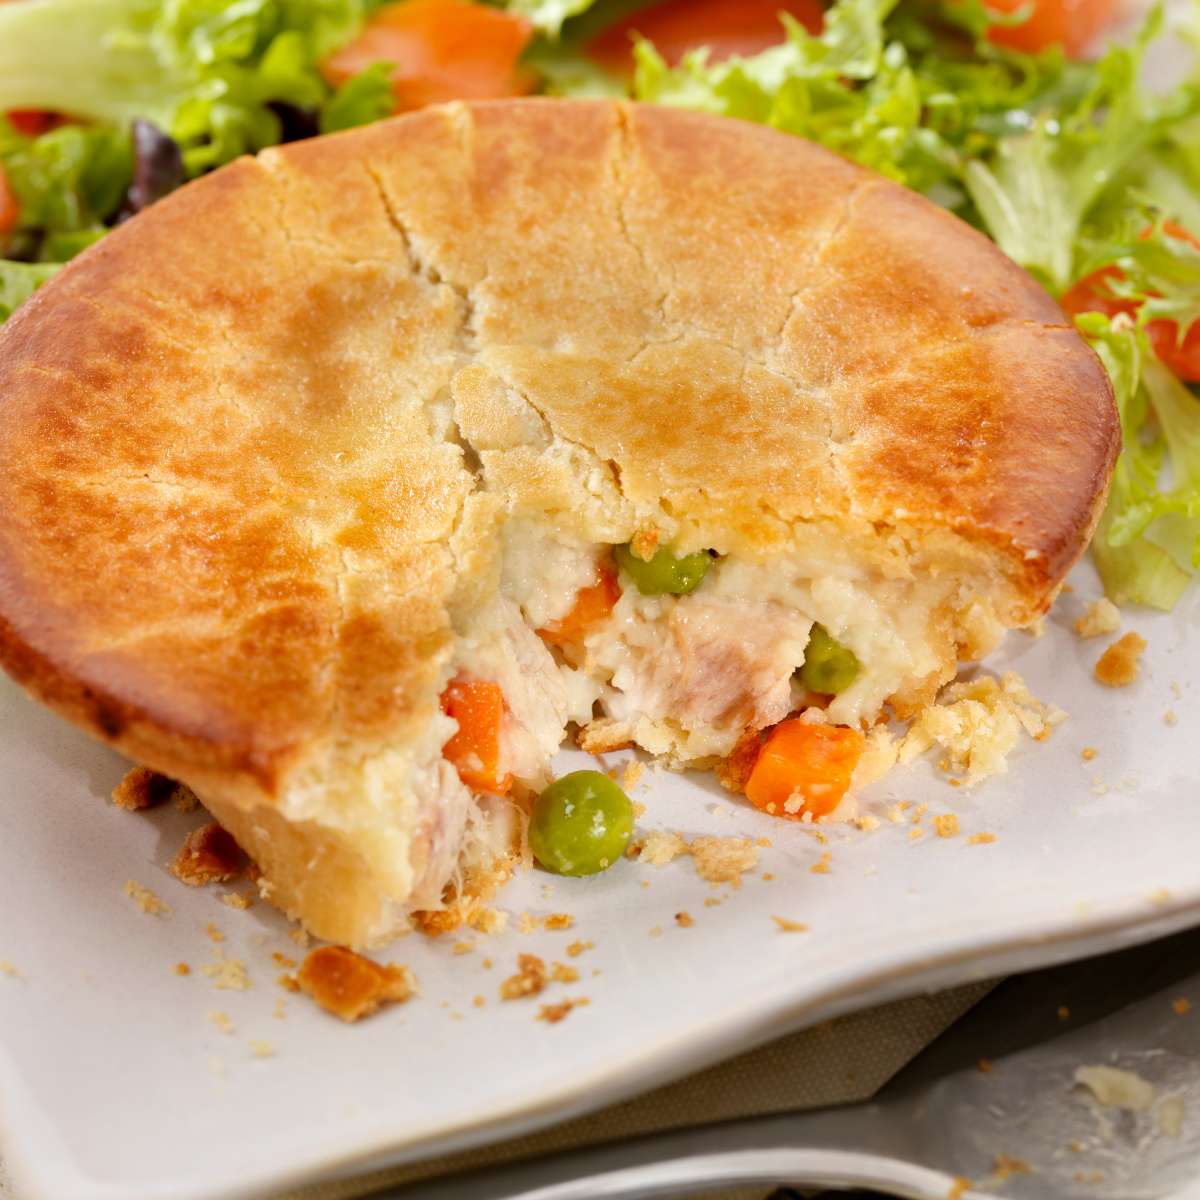 Chicken Pot Pie on the table in front of vegetables